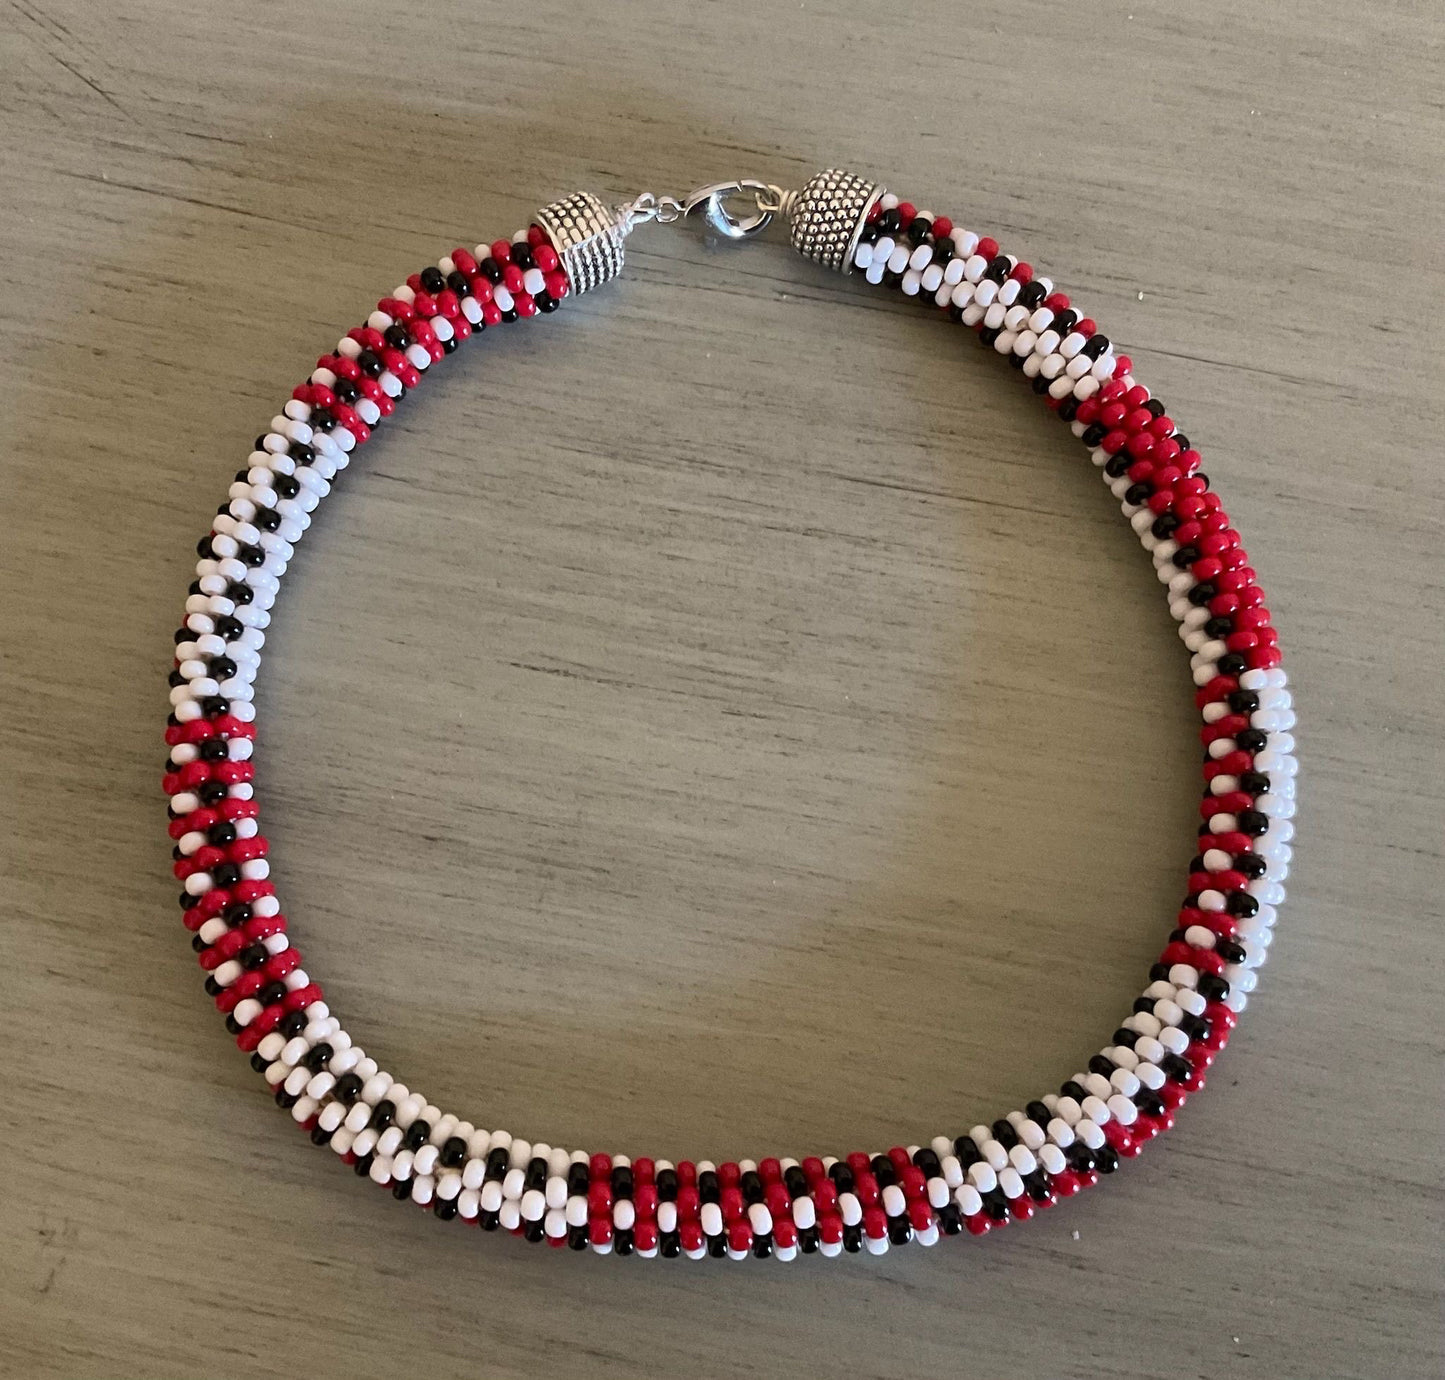 Necklace Red, White and Black Bead Crochet Necklace, Japanese Round Glass Beads